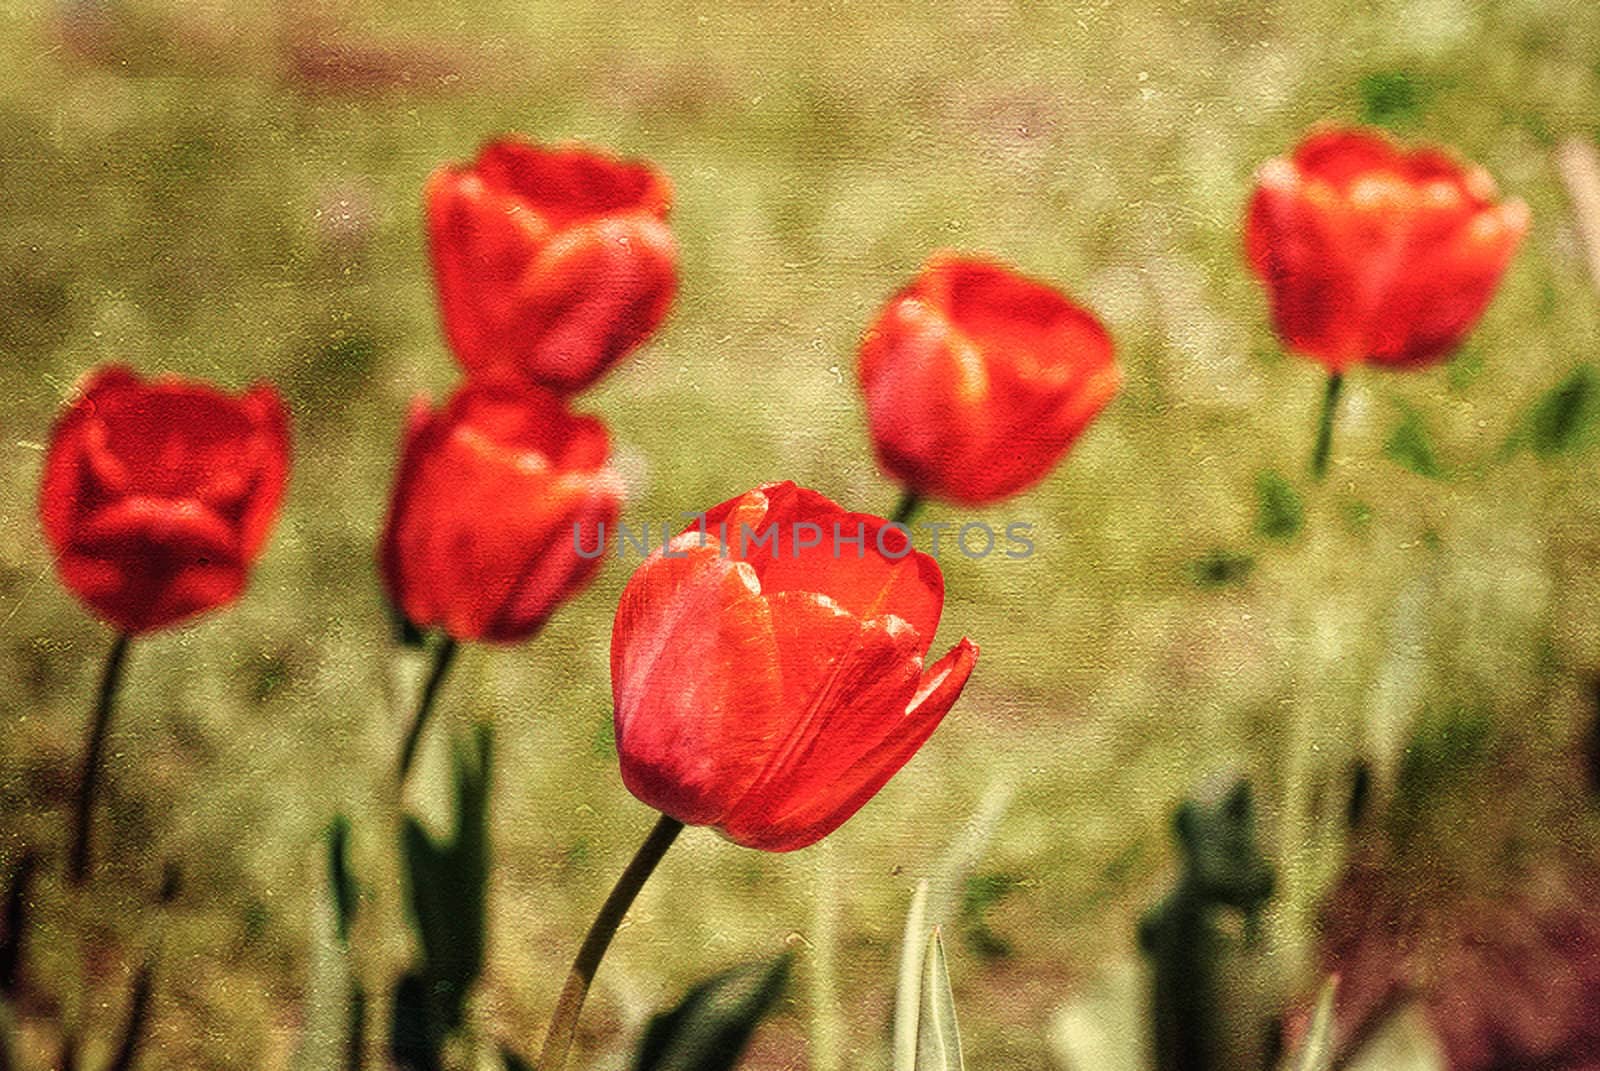 Red tulips, textured paper background by Zhukow